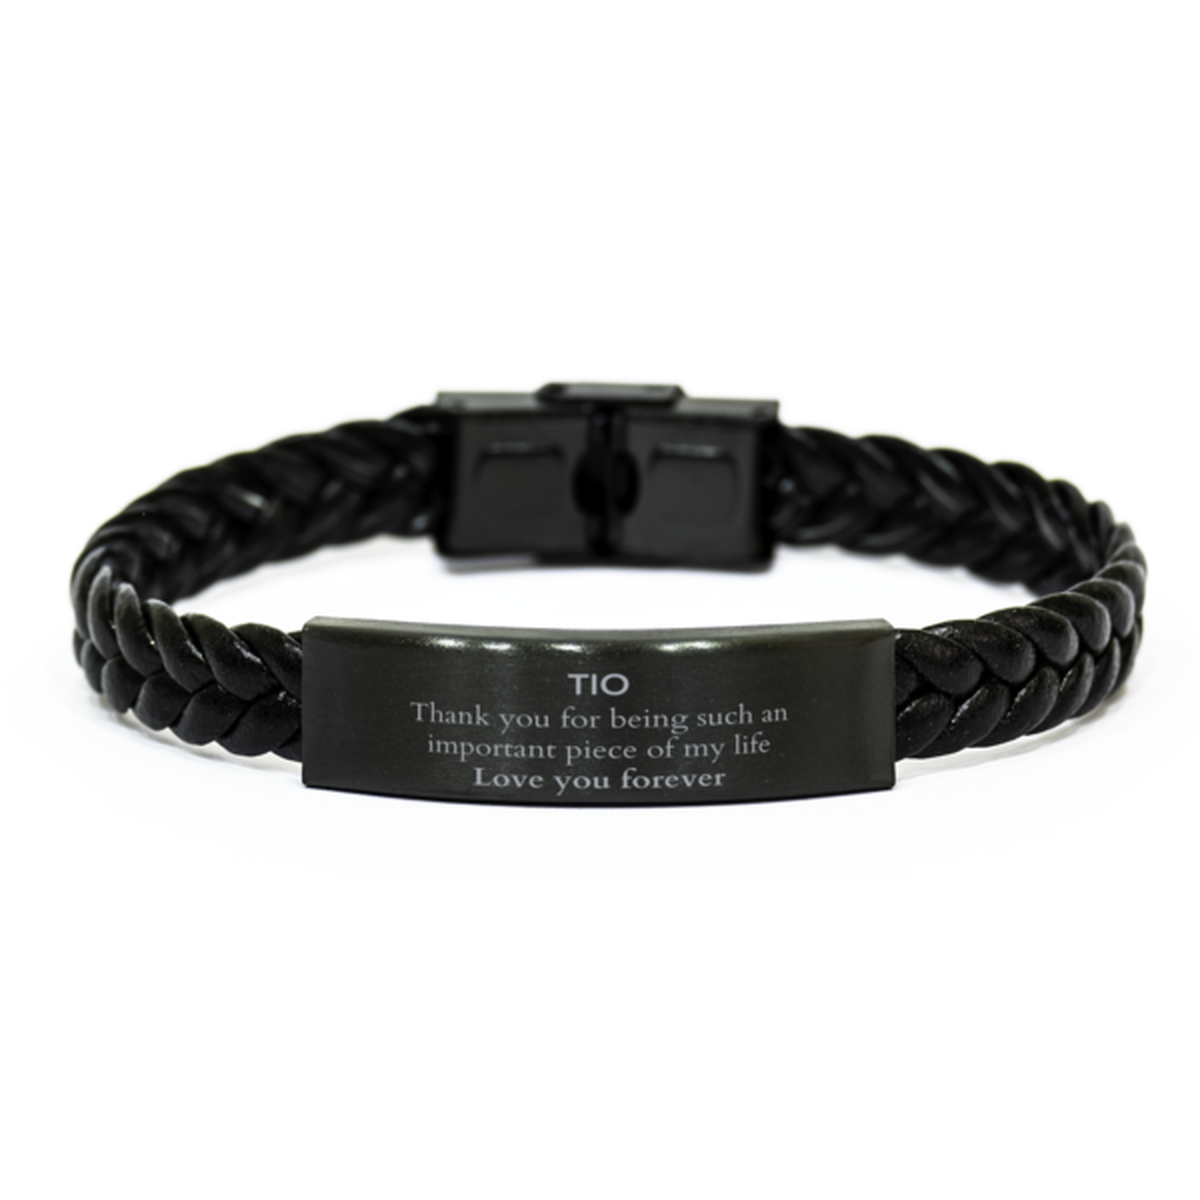 Appropriate Tio Braided Leather Bracelet Epic Birthday Gifts for Tio Thank you for being such an important piece of my life Tio Christmas Mothers Fathers Day